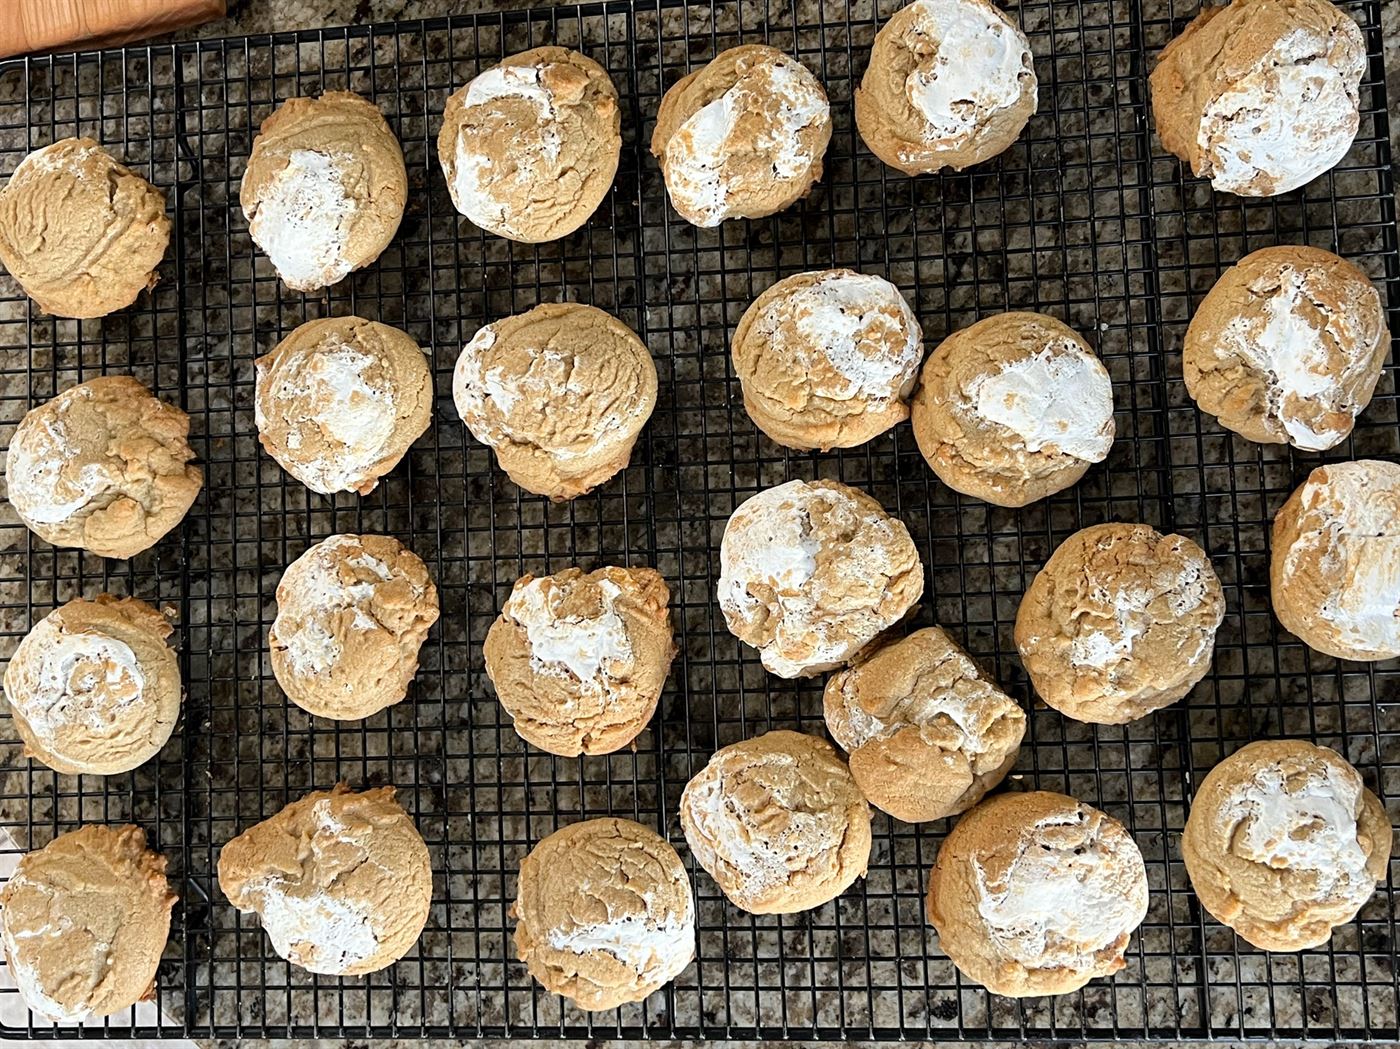 Brown butter brings out the toastiness of these cookies. Samantha Bailey | The Montclarion